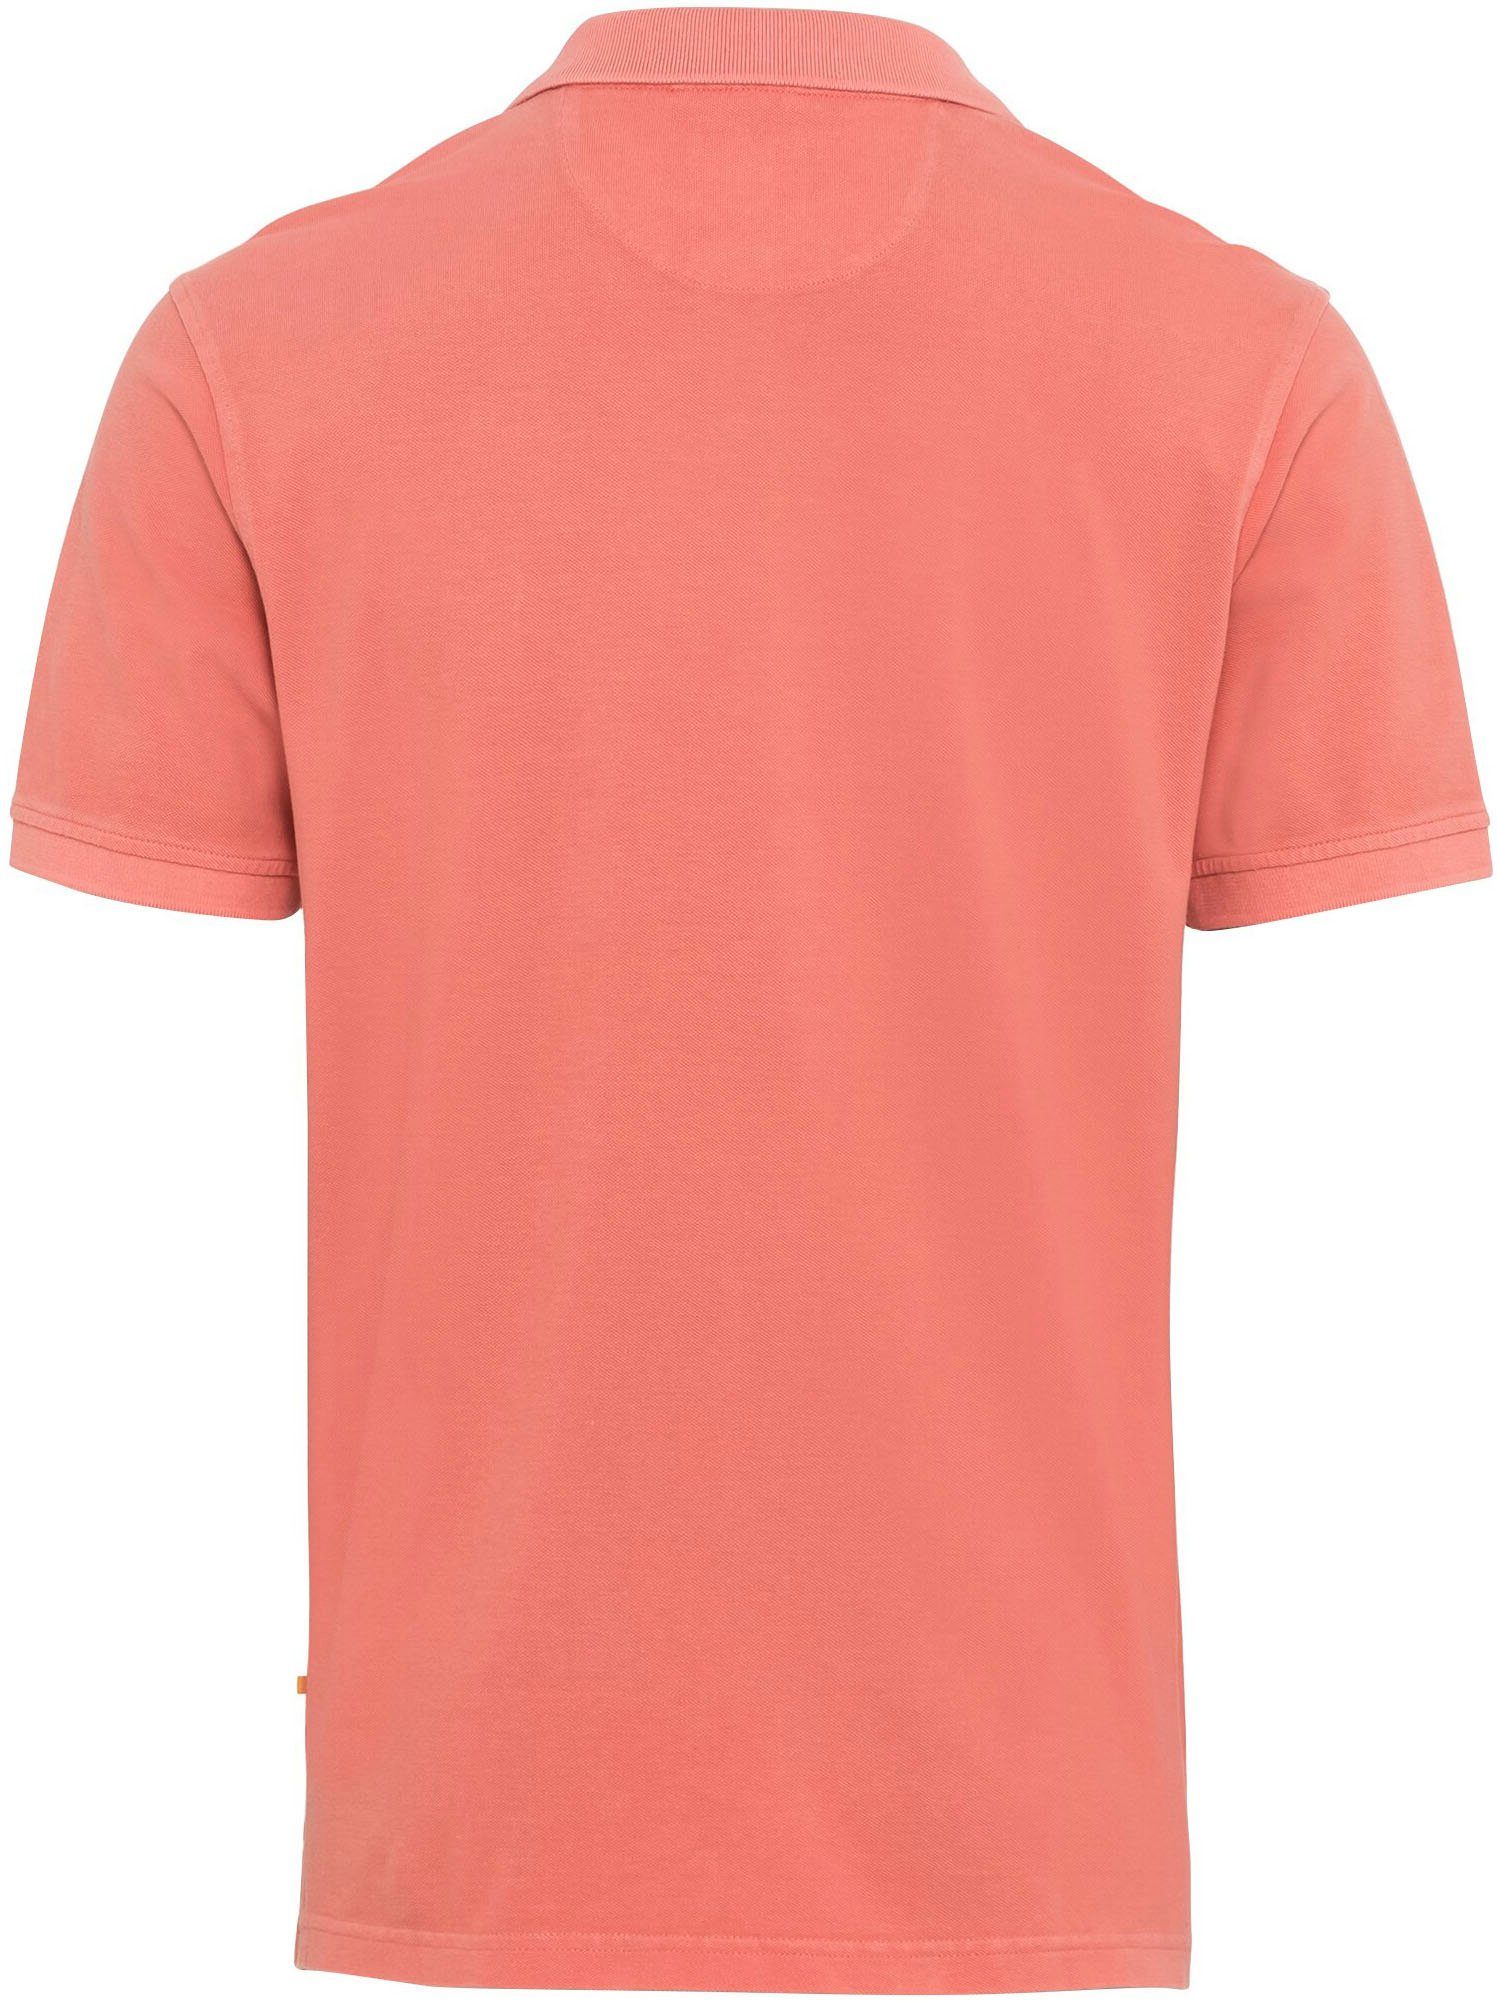 Poloshirt active camel red Coral